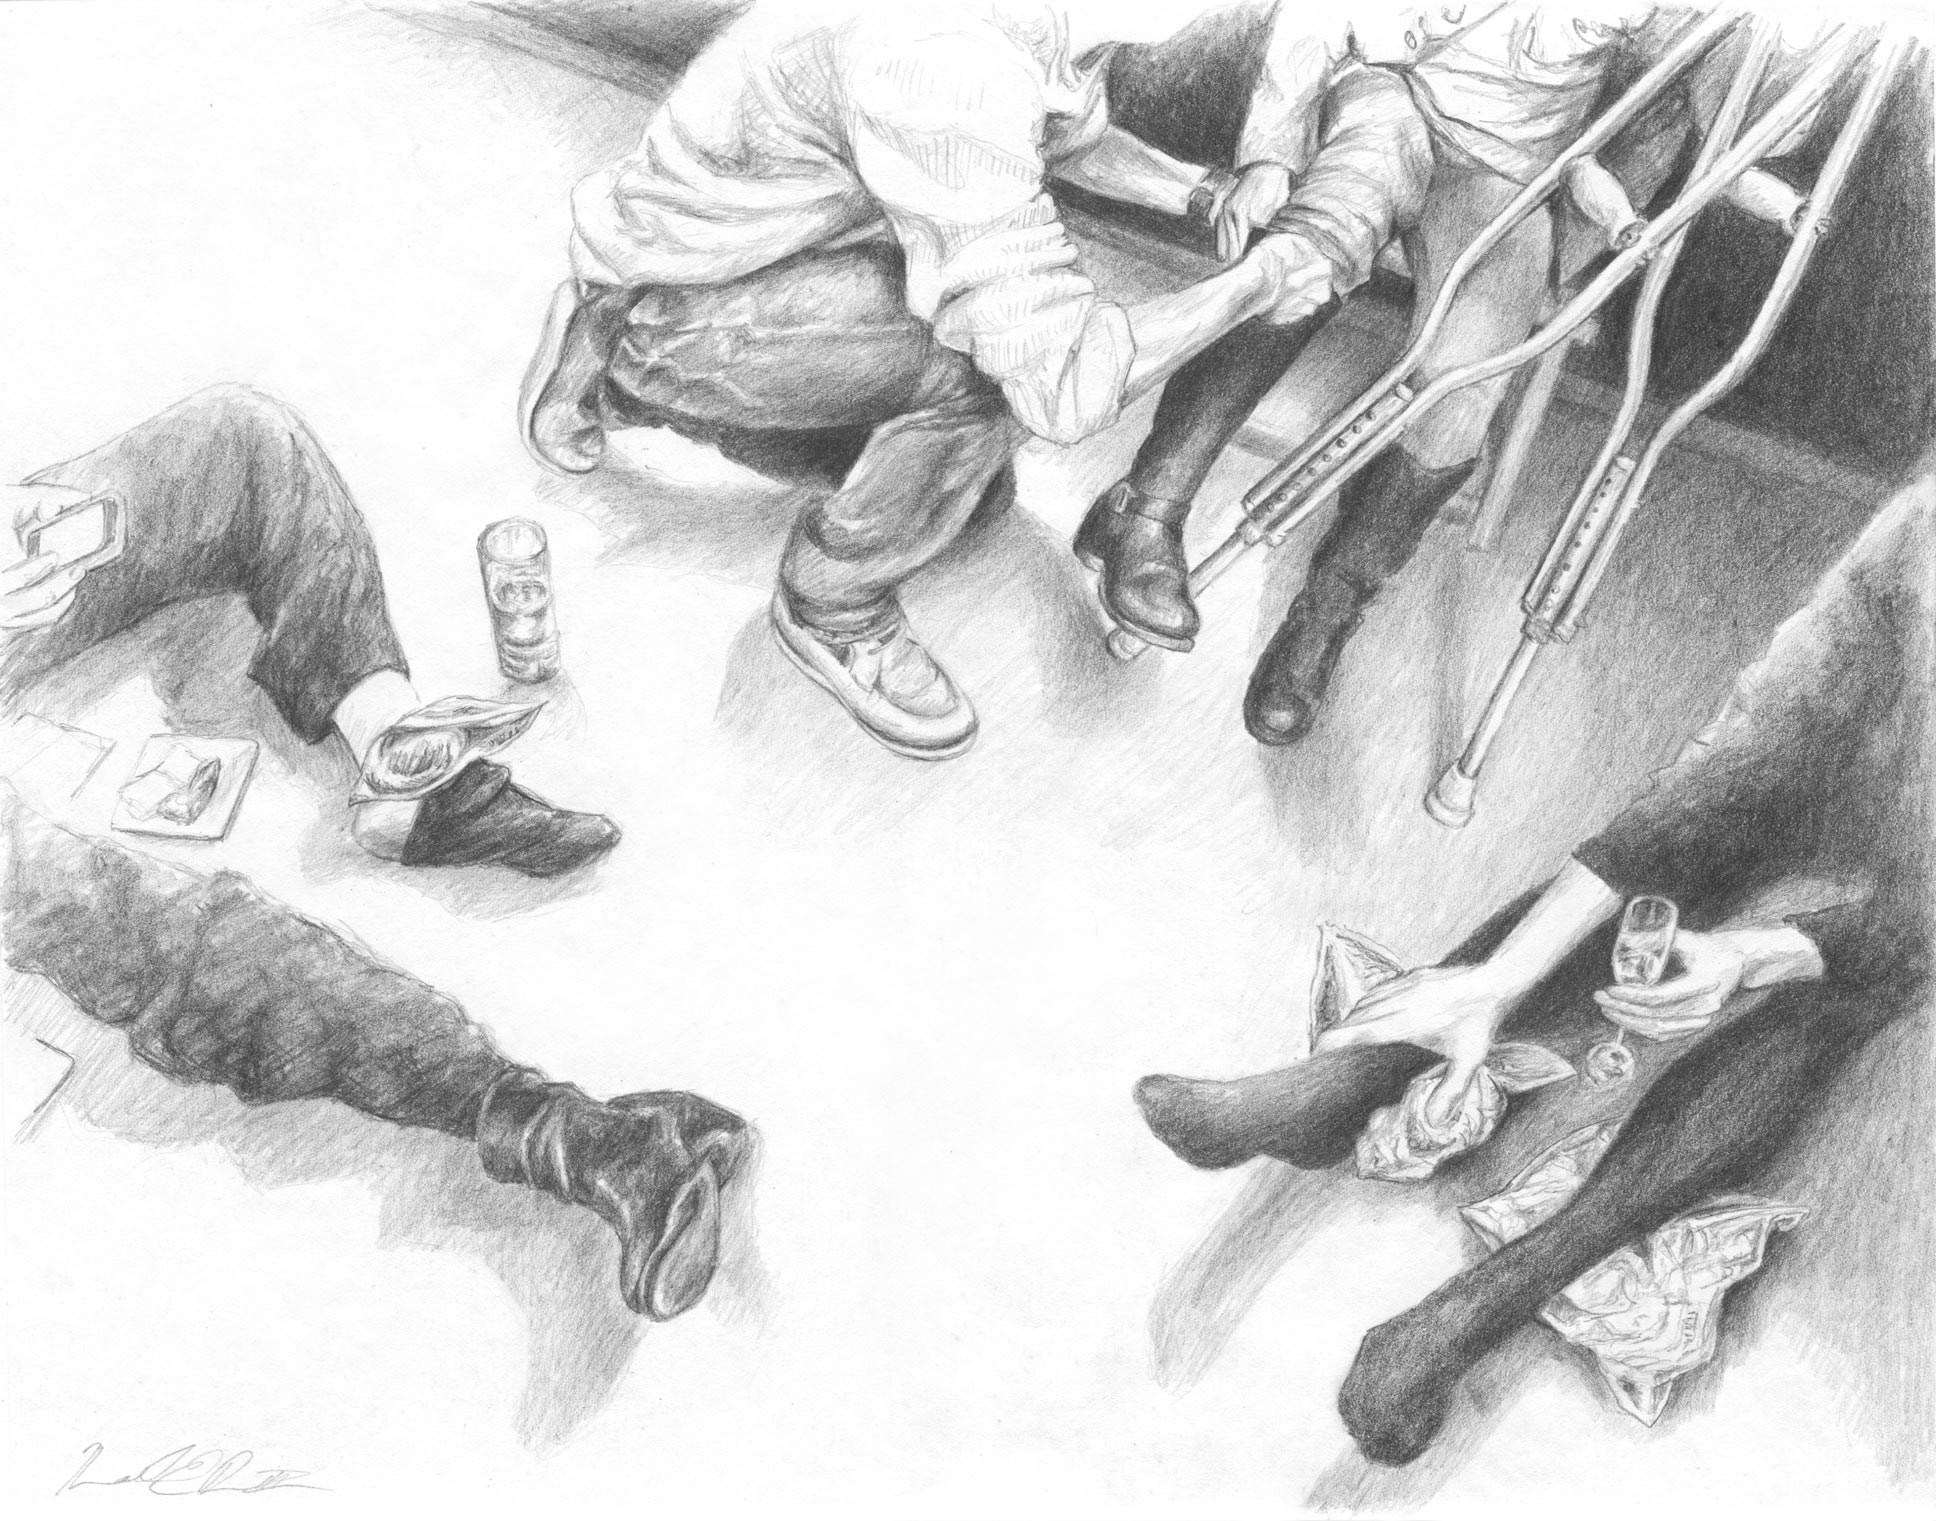    After Show Reception, Kennedy Center   Graphite on Paper 14in x 11in 